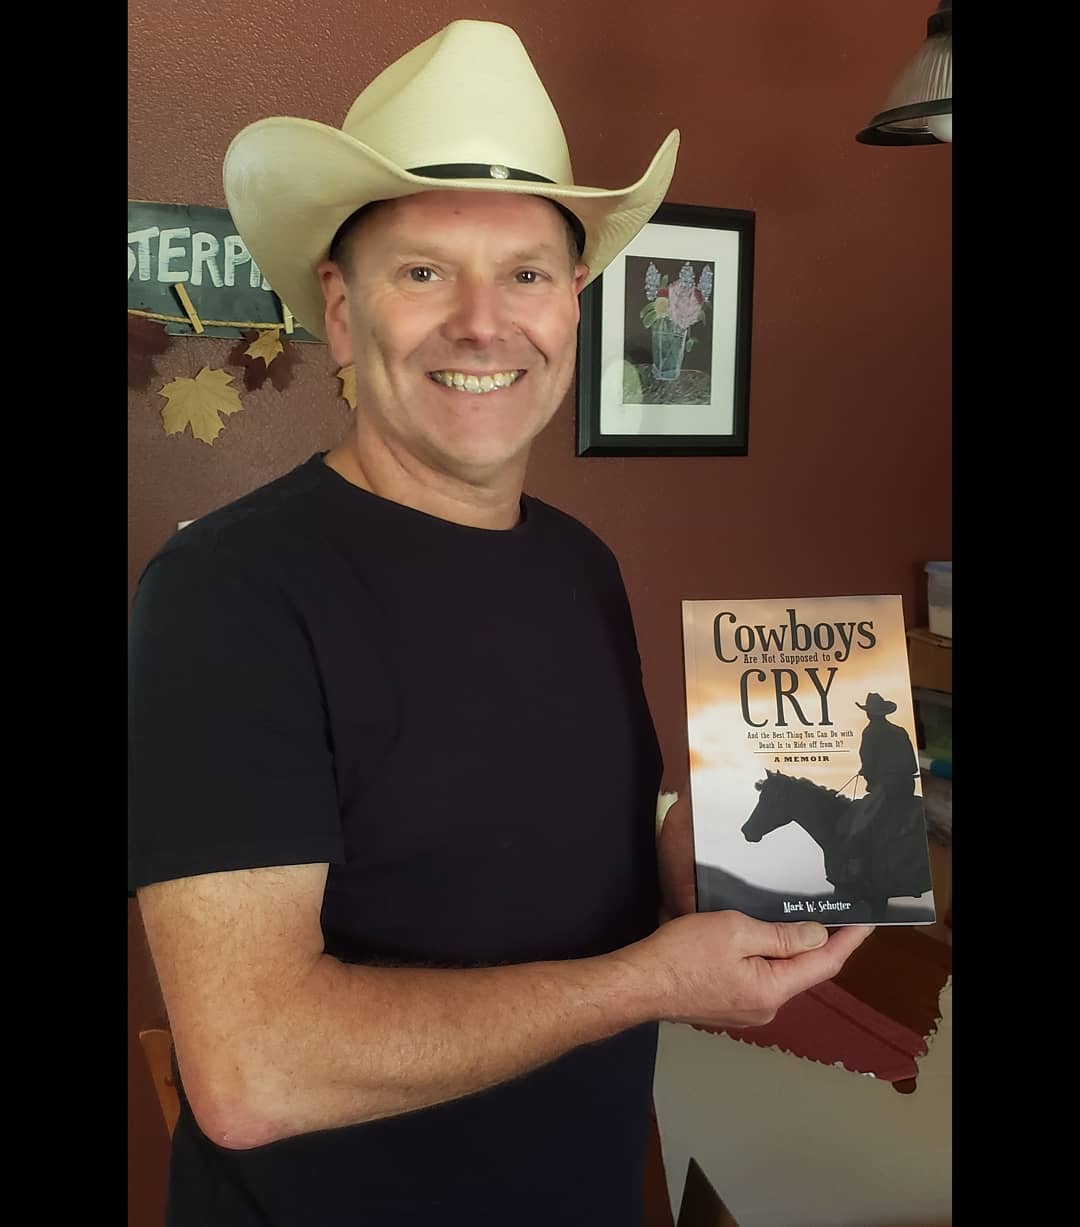 Shows me, the author, holding the first physical copy of my upcoming memoir - Cowboys Are Not Supposed to Cry